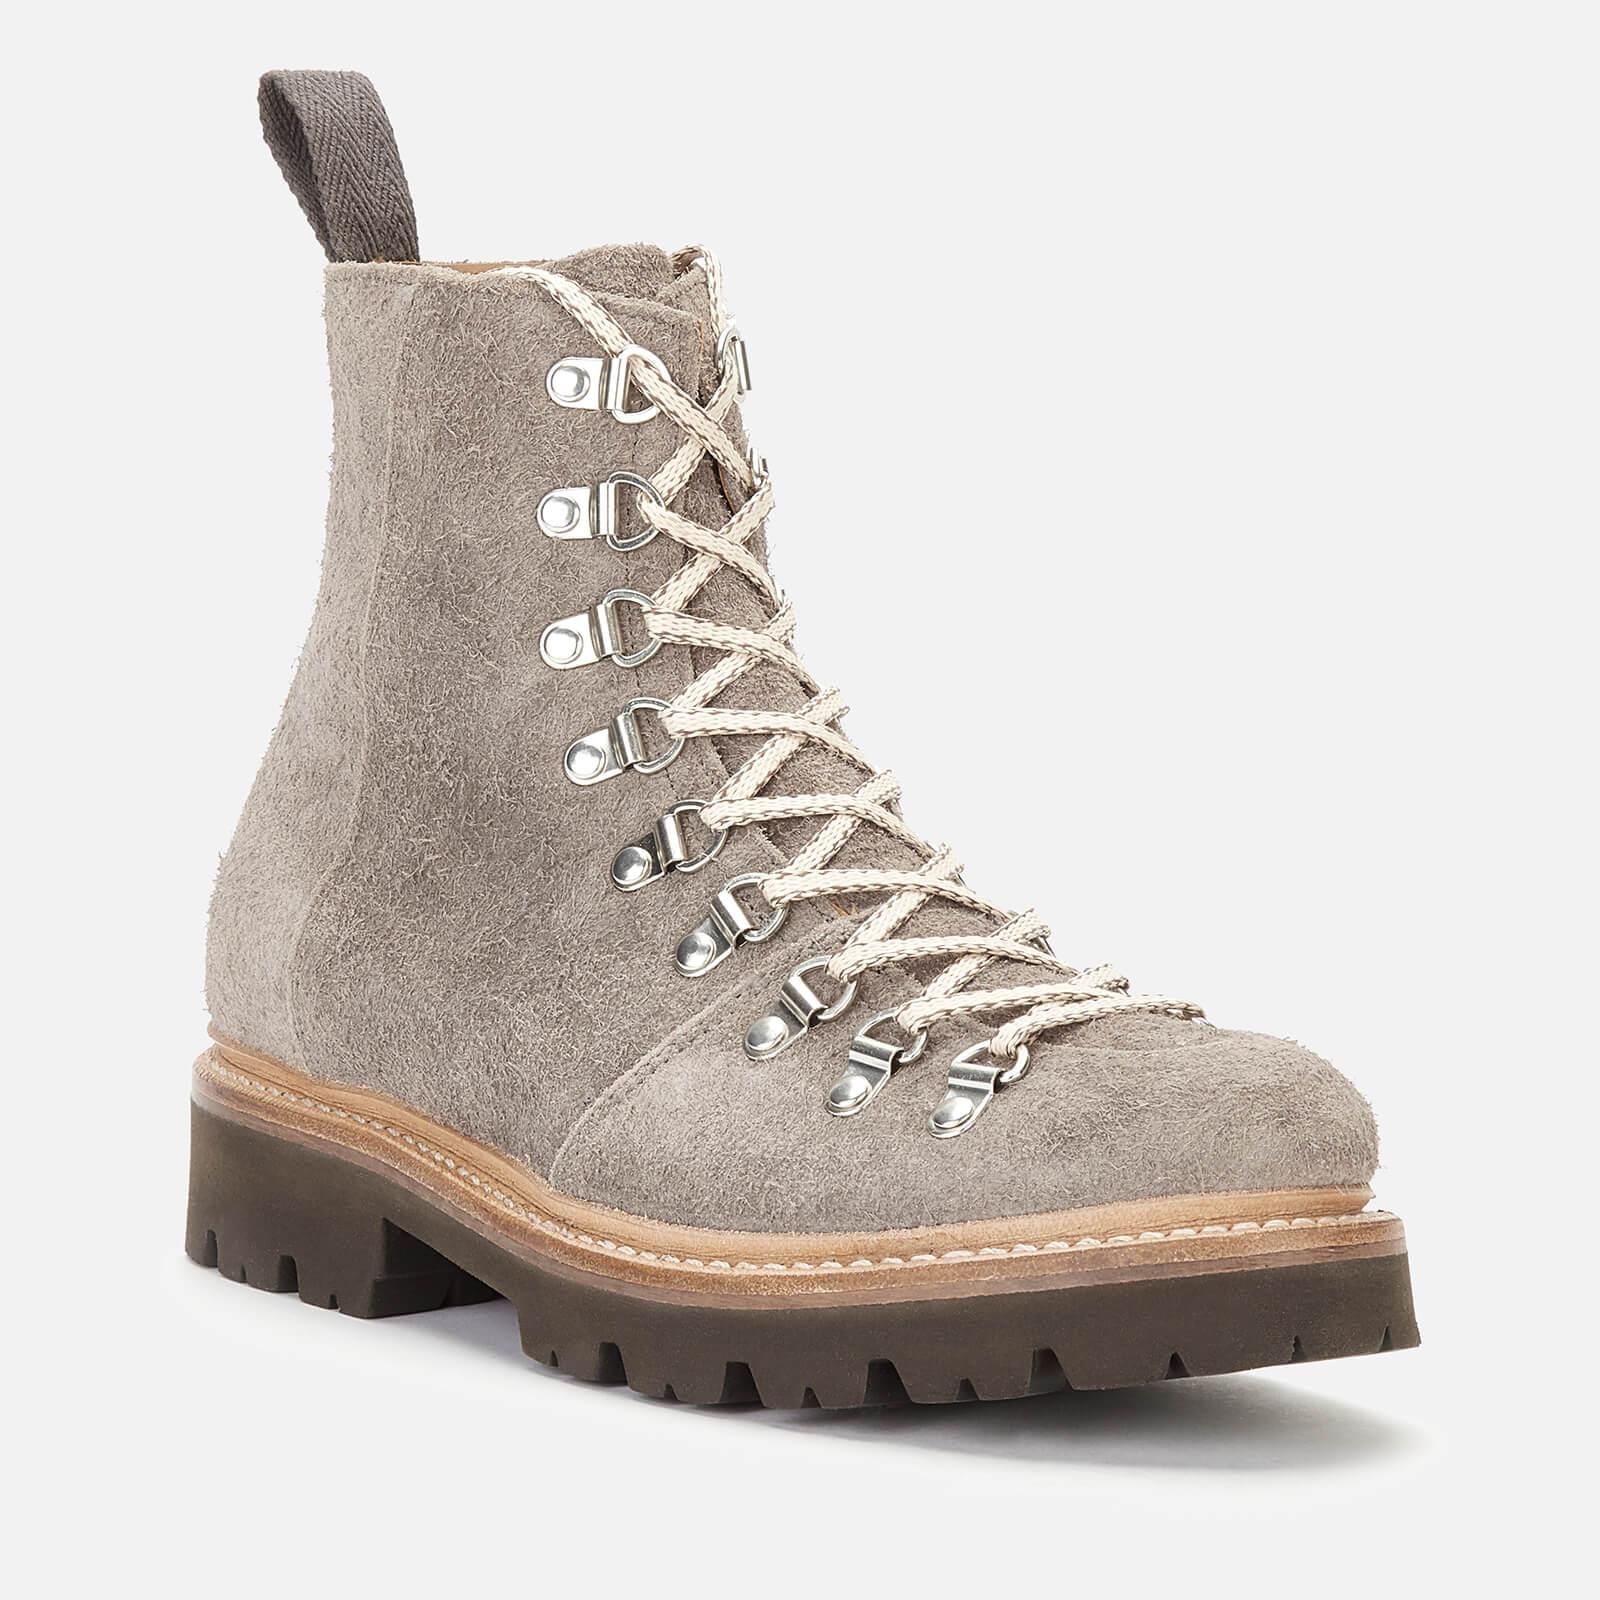 Grenson Nanette Suede Hiking Style Boots in Grey (Gray) - Lyst